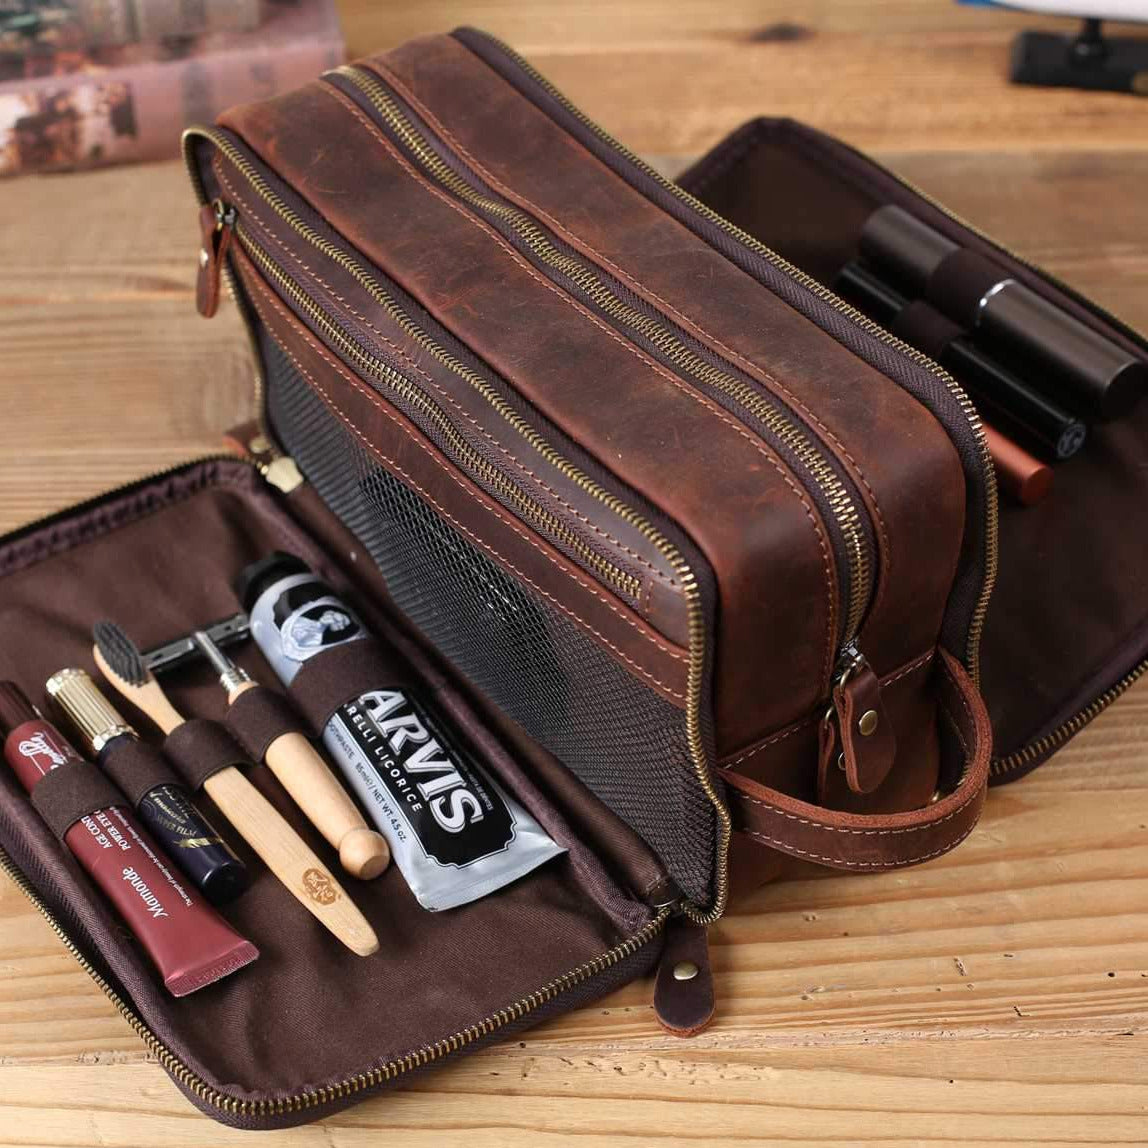 Sogaïa ™ personalized leather toiletry bag